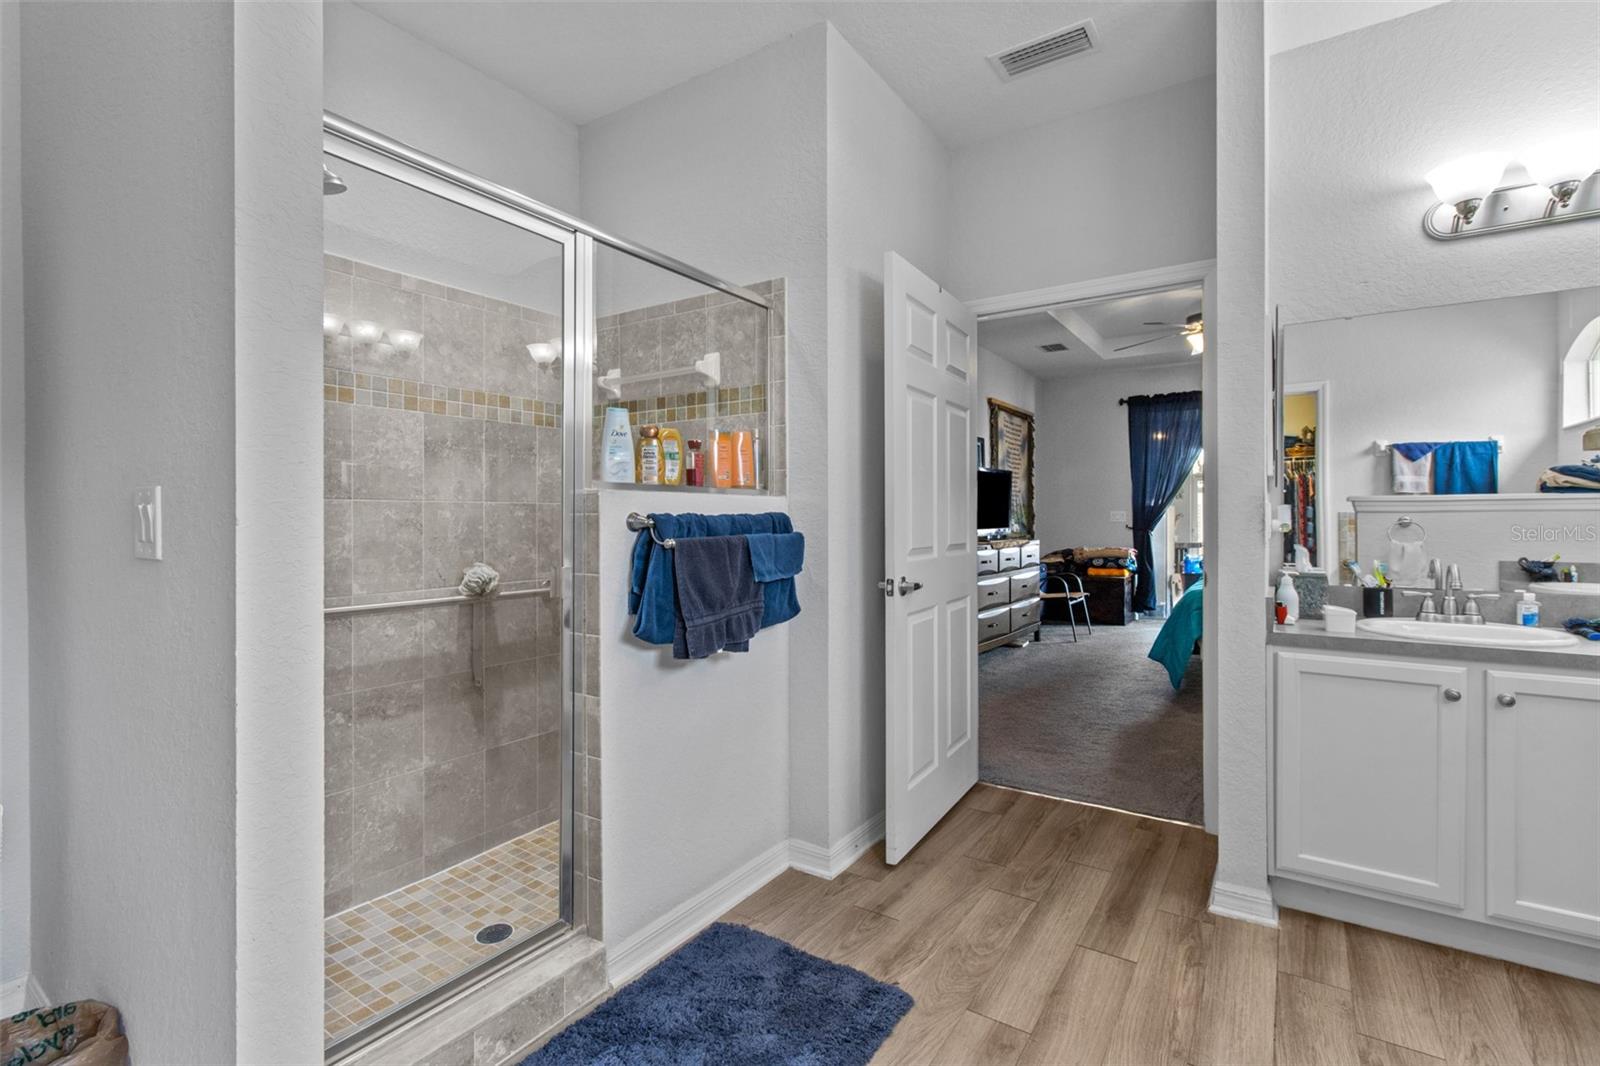 This master bath boasts a walk-in shower too!